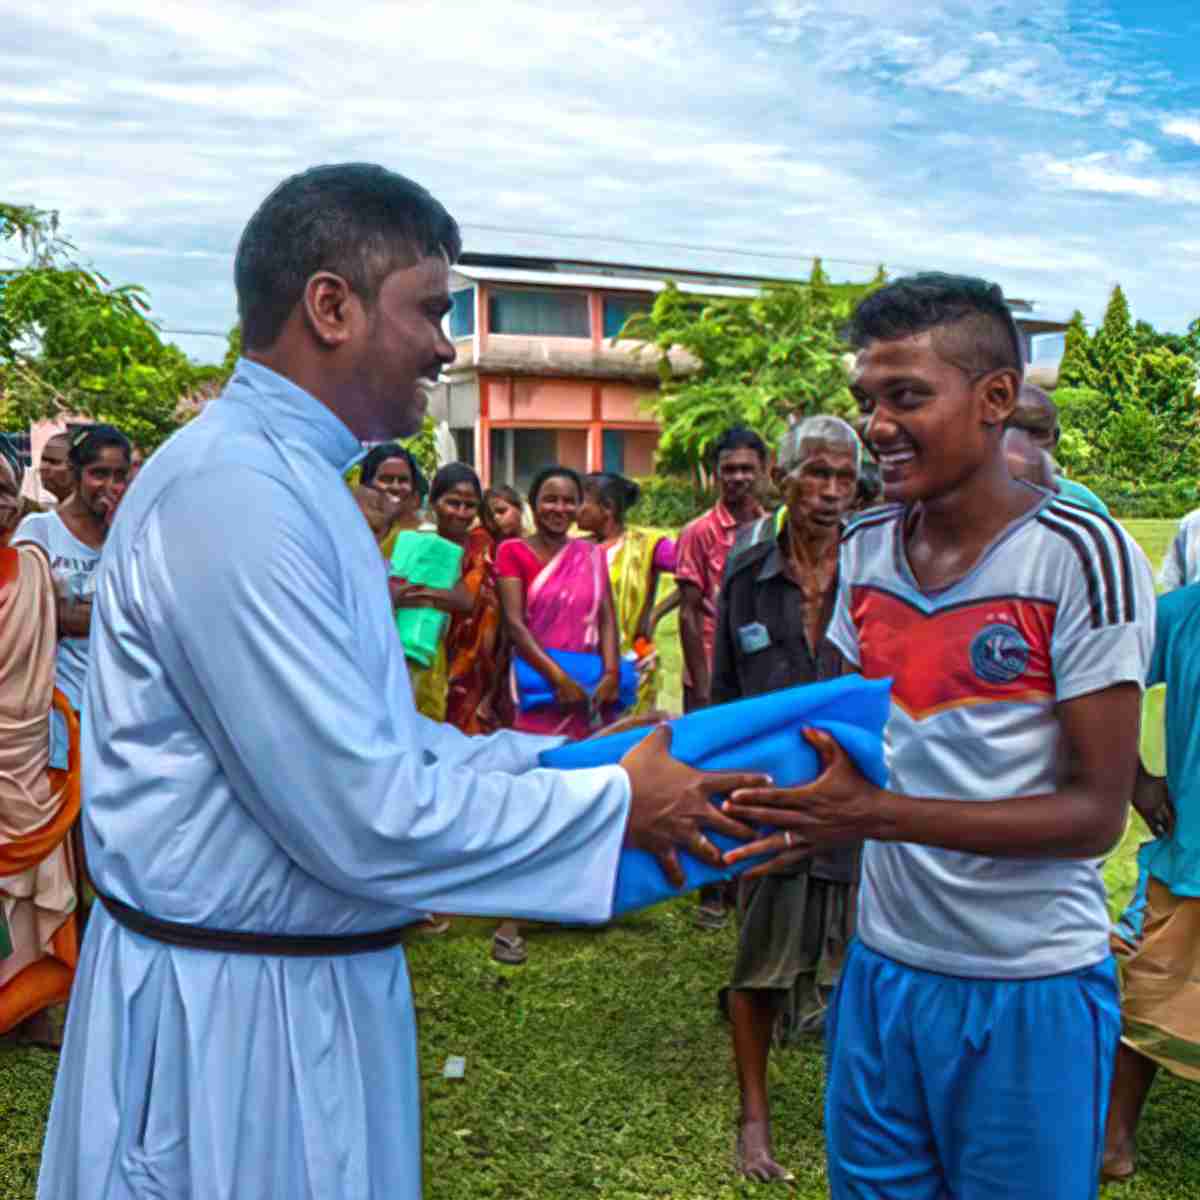 GFA World gift distribution helps alleviate poverty in village